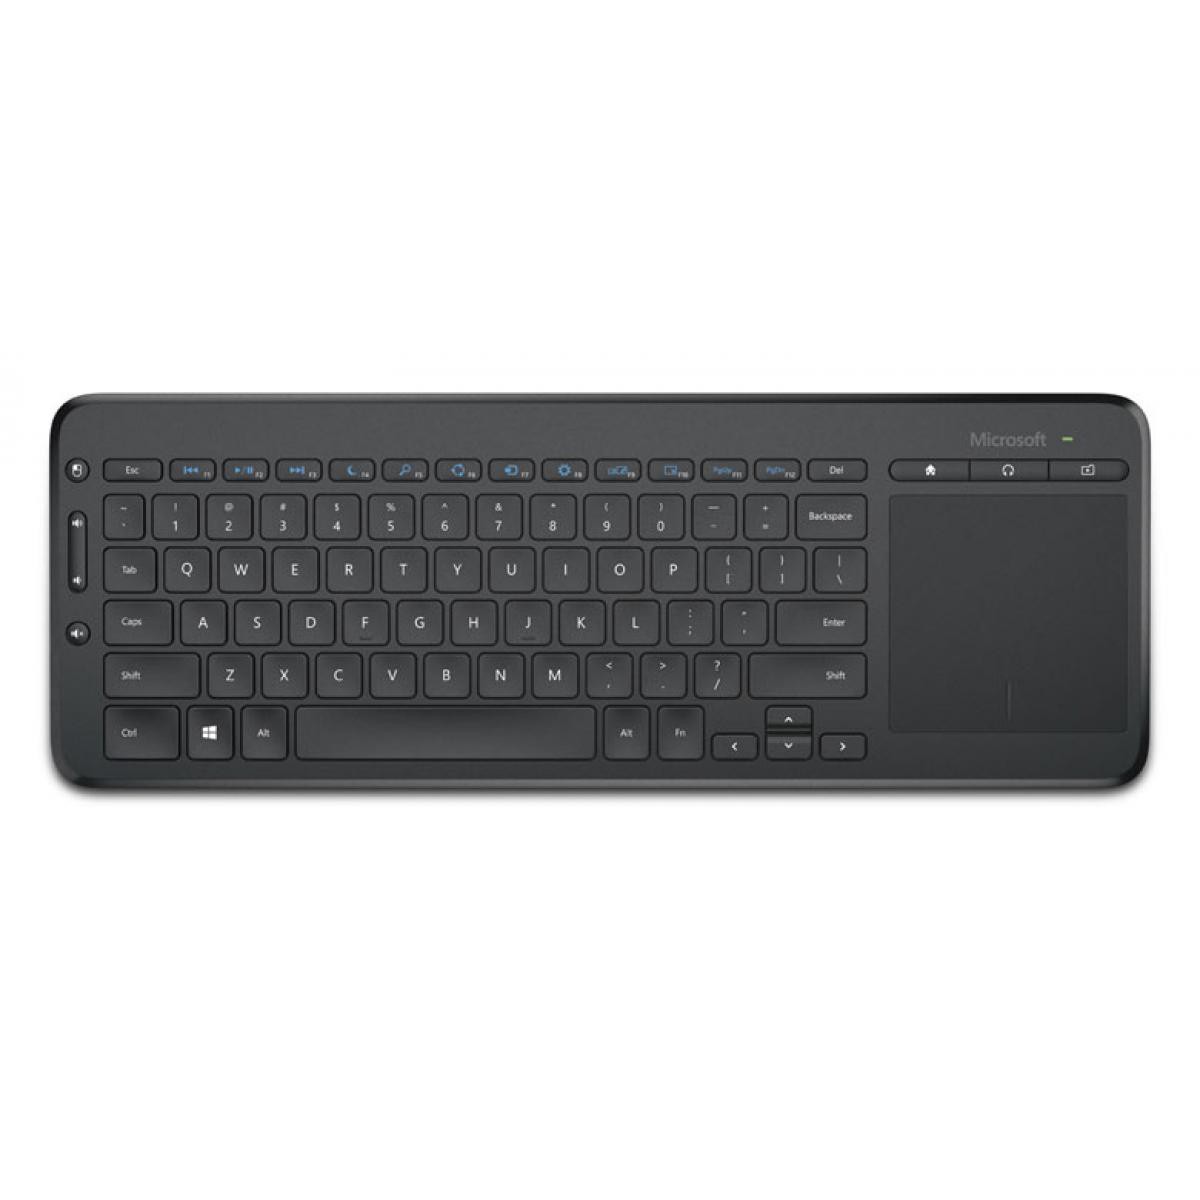 Microsoft - Microsoft MS All-in-One Media Keyboard black (DE) MS All-in-One cordless Media Keyboard incl. Touchpad black (DE) - Pack Clavier Souris